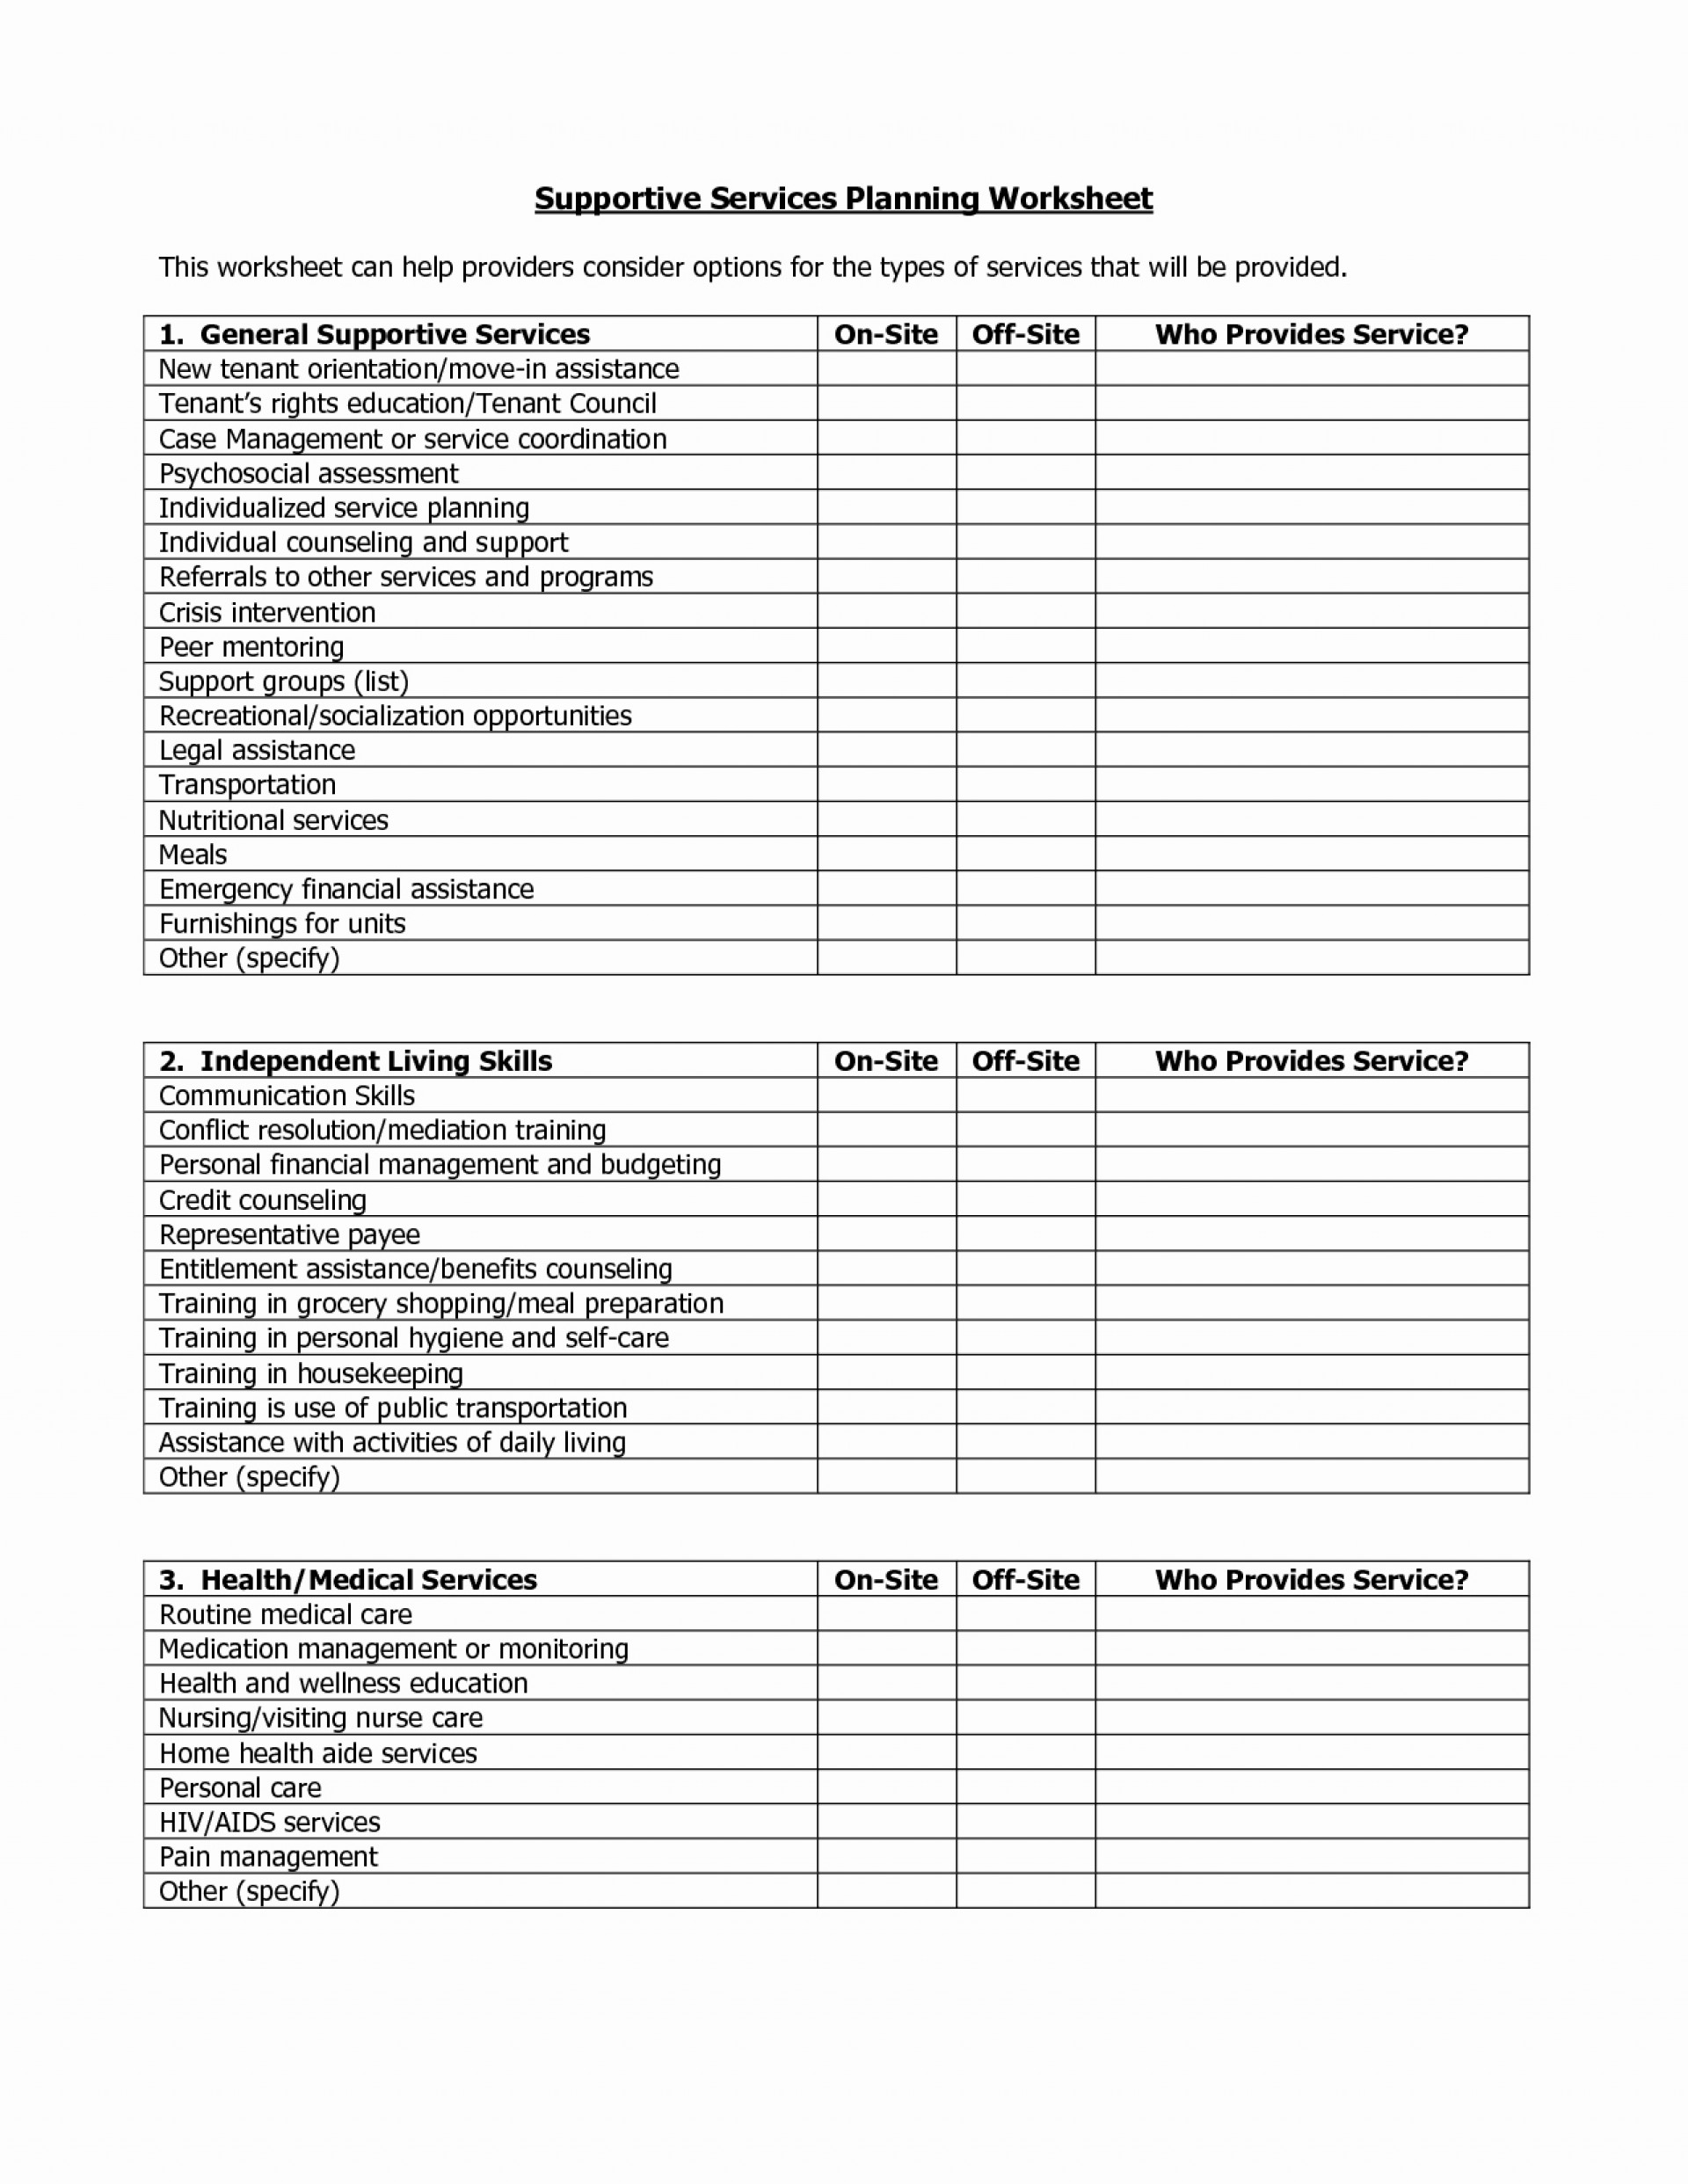 006 Relapse Prevention Plan Indexs Drug Awesome Template Templates With Regard To Addiction Recovery Plan Worksheet